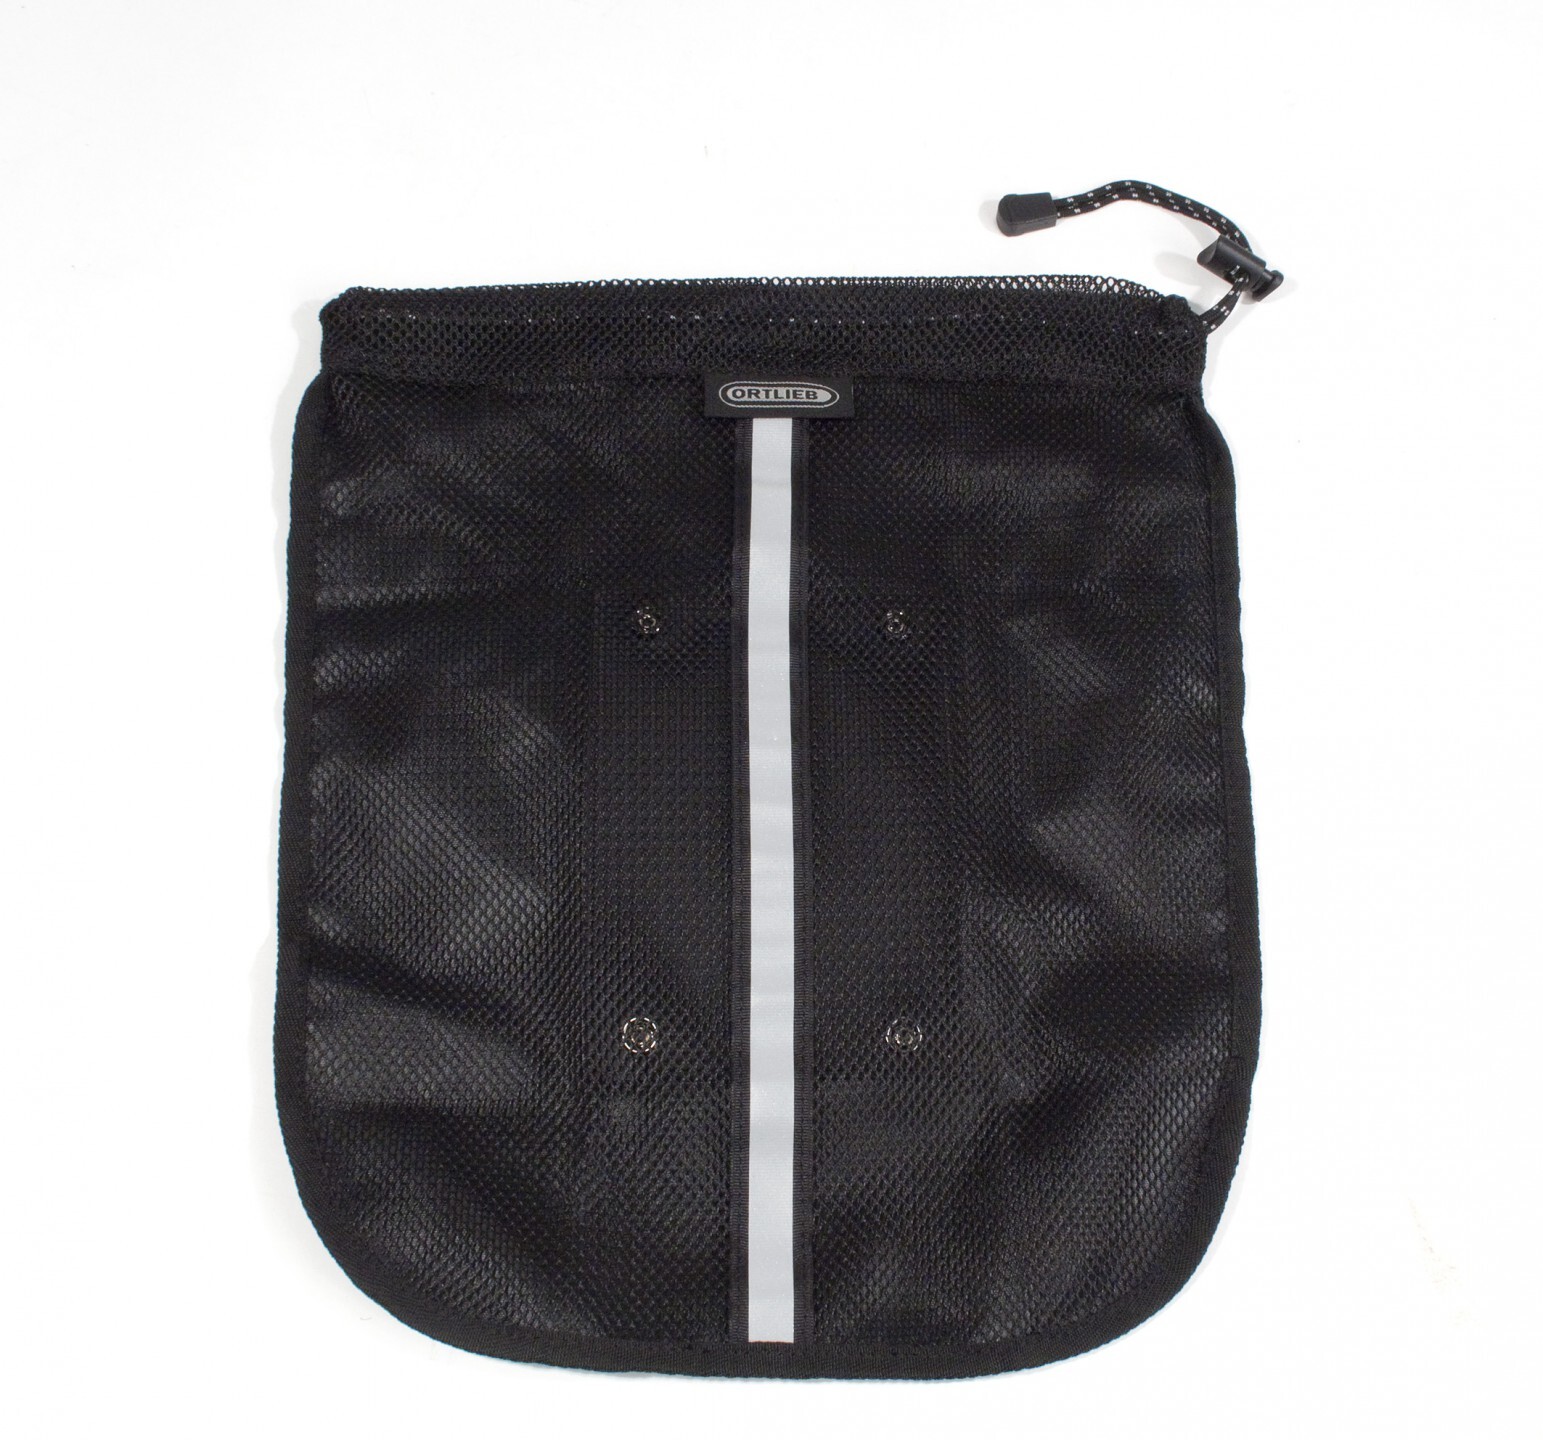 Ortlieb Mesh Pocket for panniers